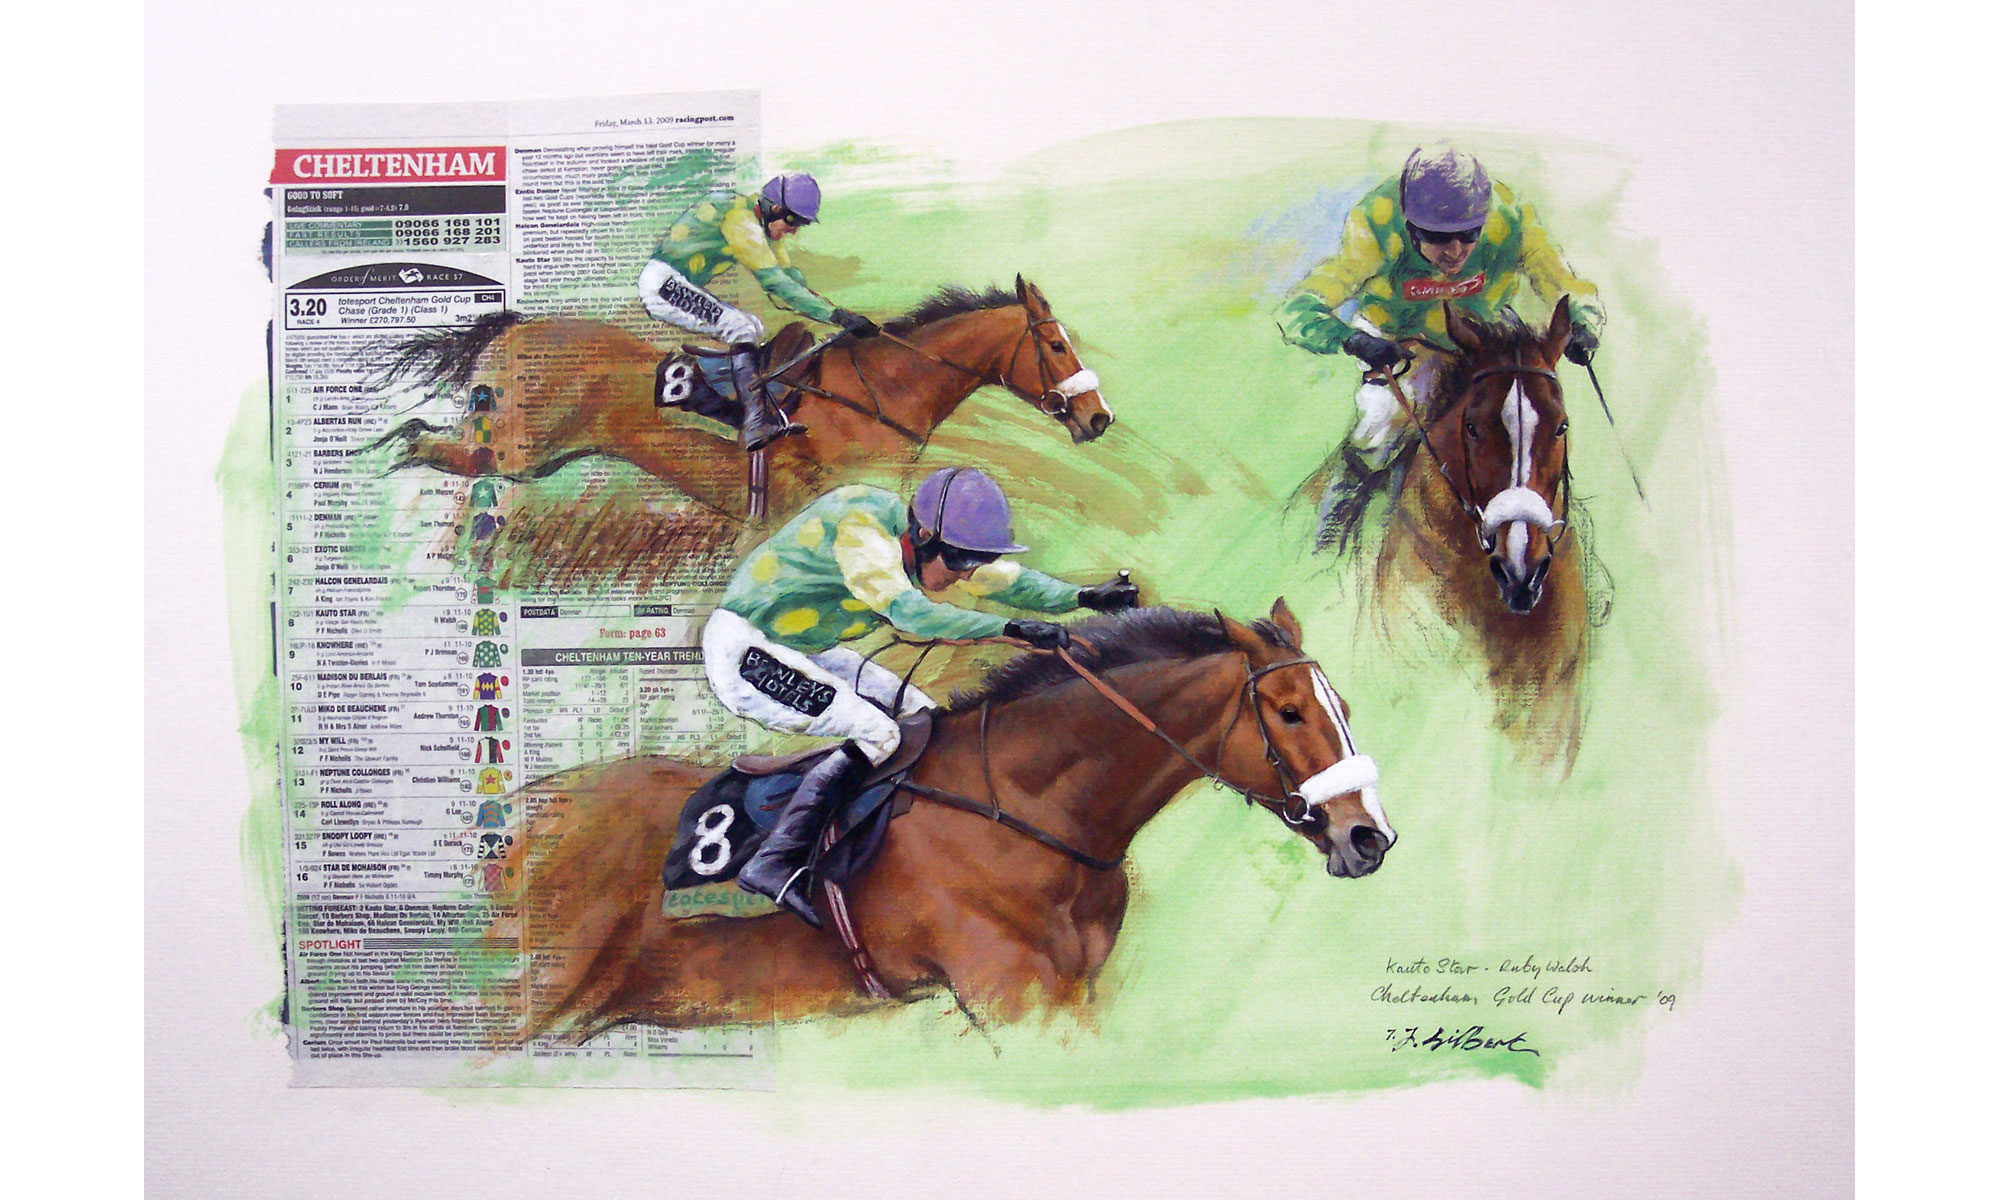 Kauto Star Horse Racing Painting by Terence J Gilbert Oil on Board